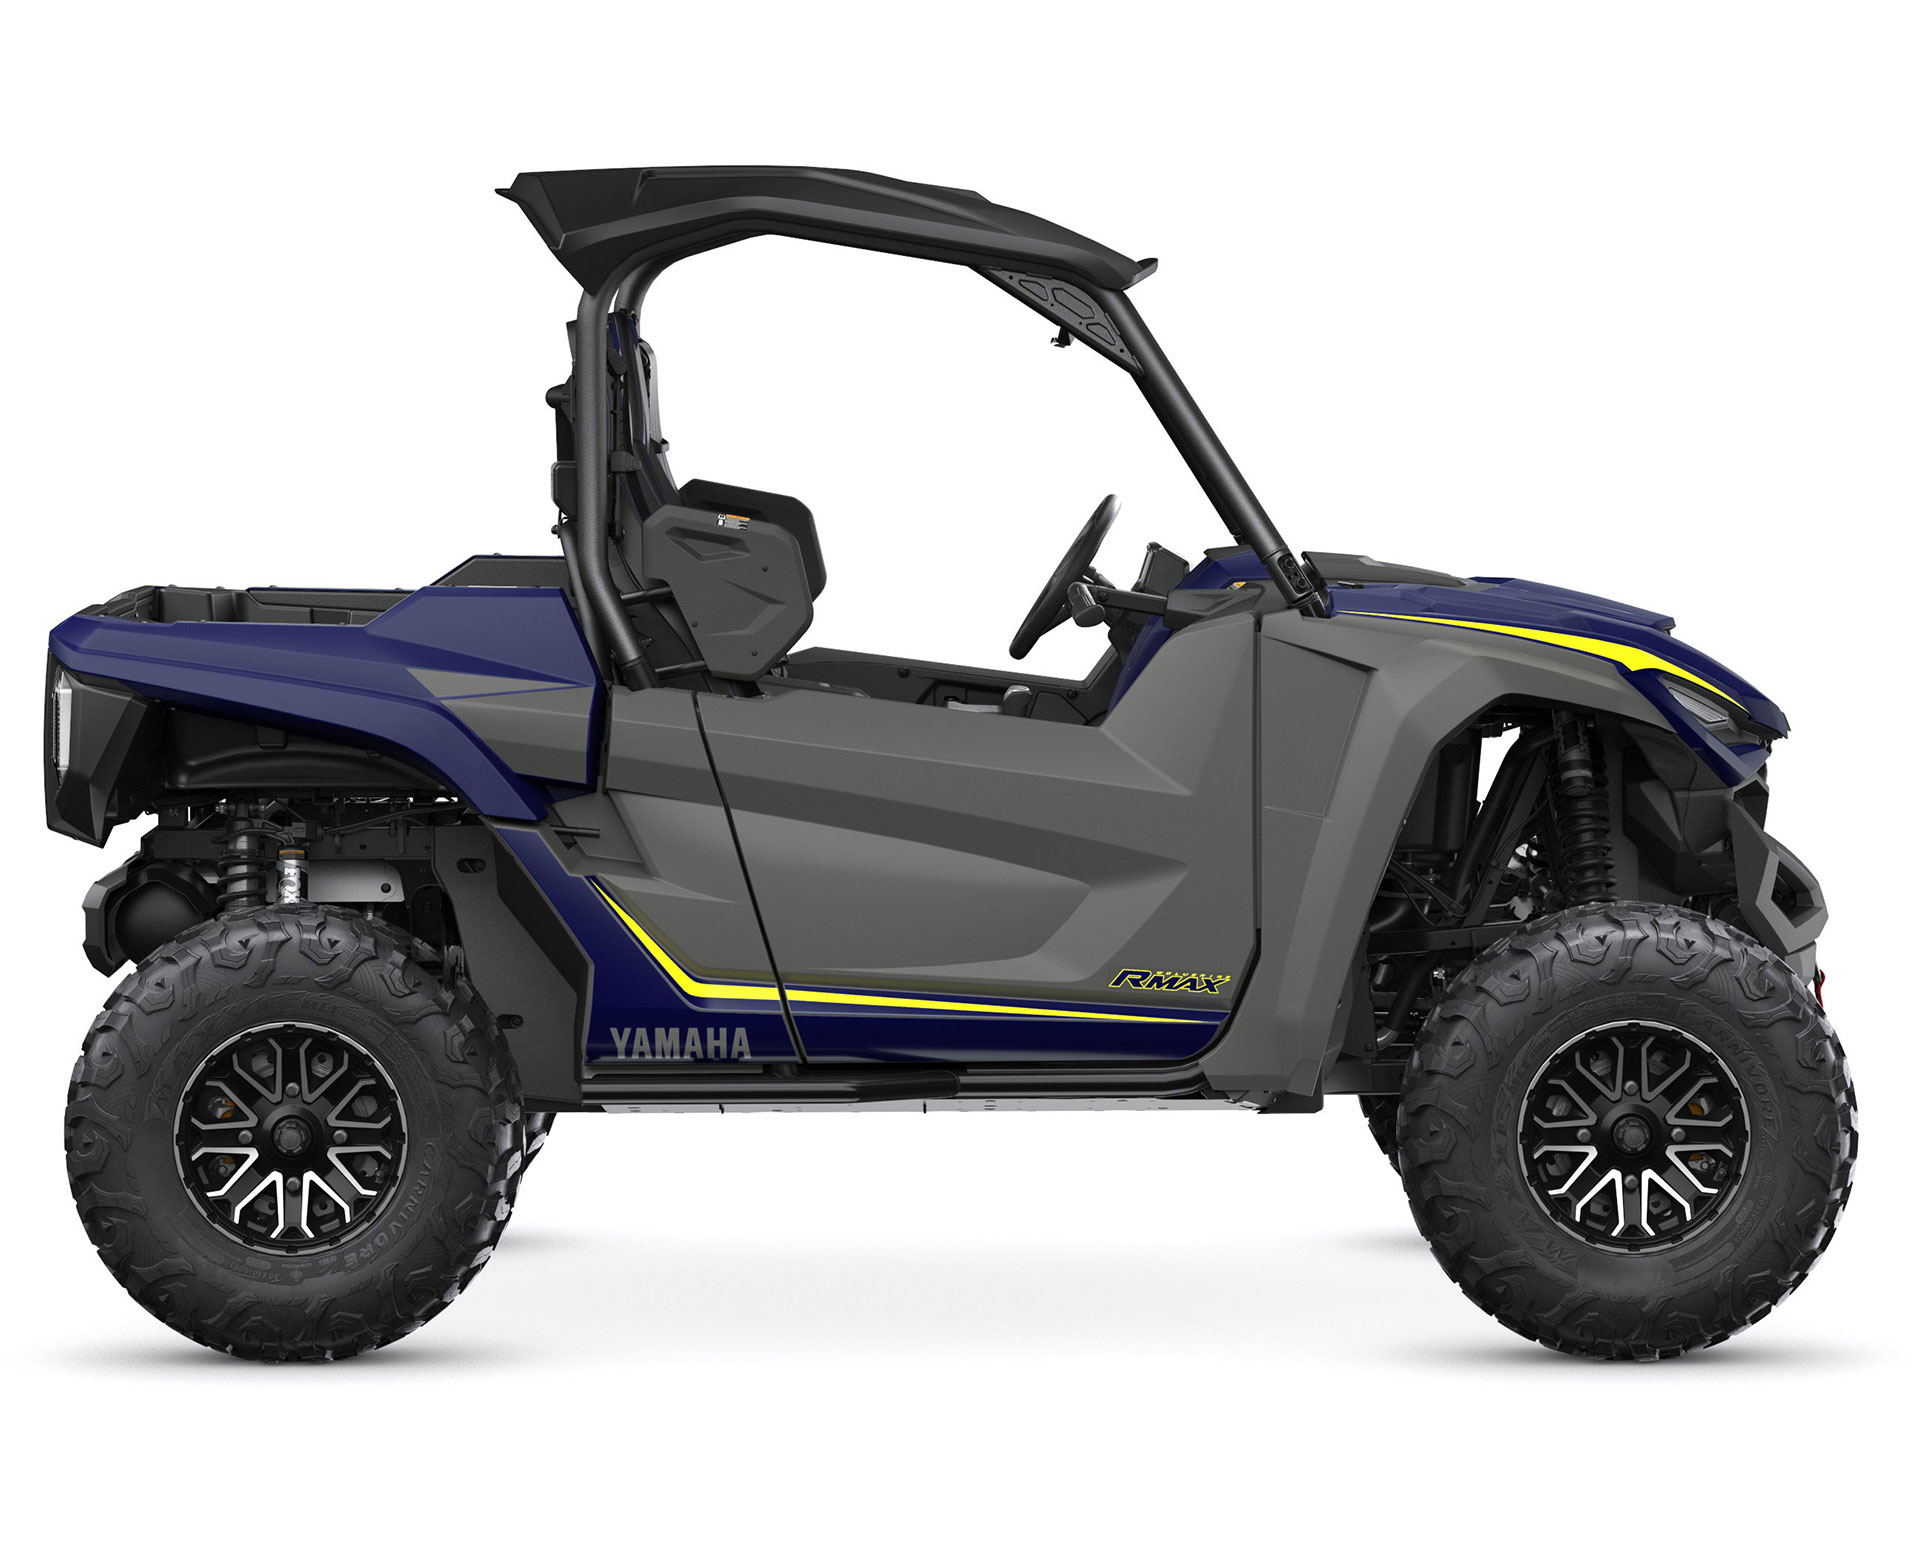 Thumbnail of your customized 2023 WOLVERINE® RMAX2™ 1000 LE